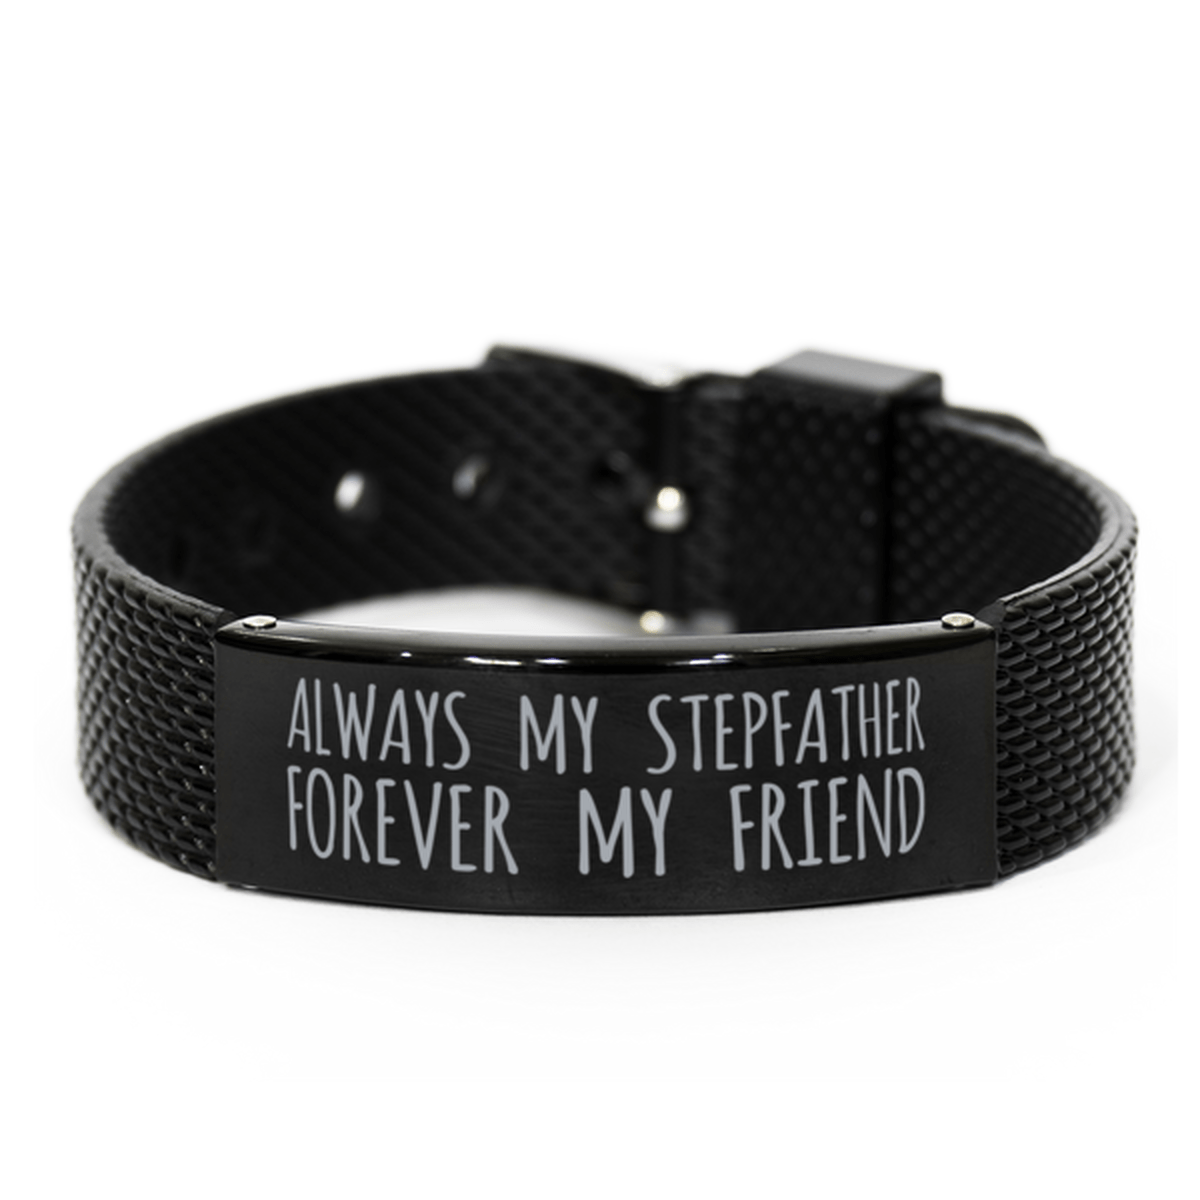 Inspirational Stepfather Black Shark Mesh Bracelet, Always My Stepfather Forever My Friend, Best Birthday Gifts for Family Friends